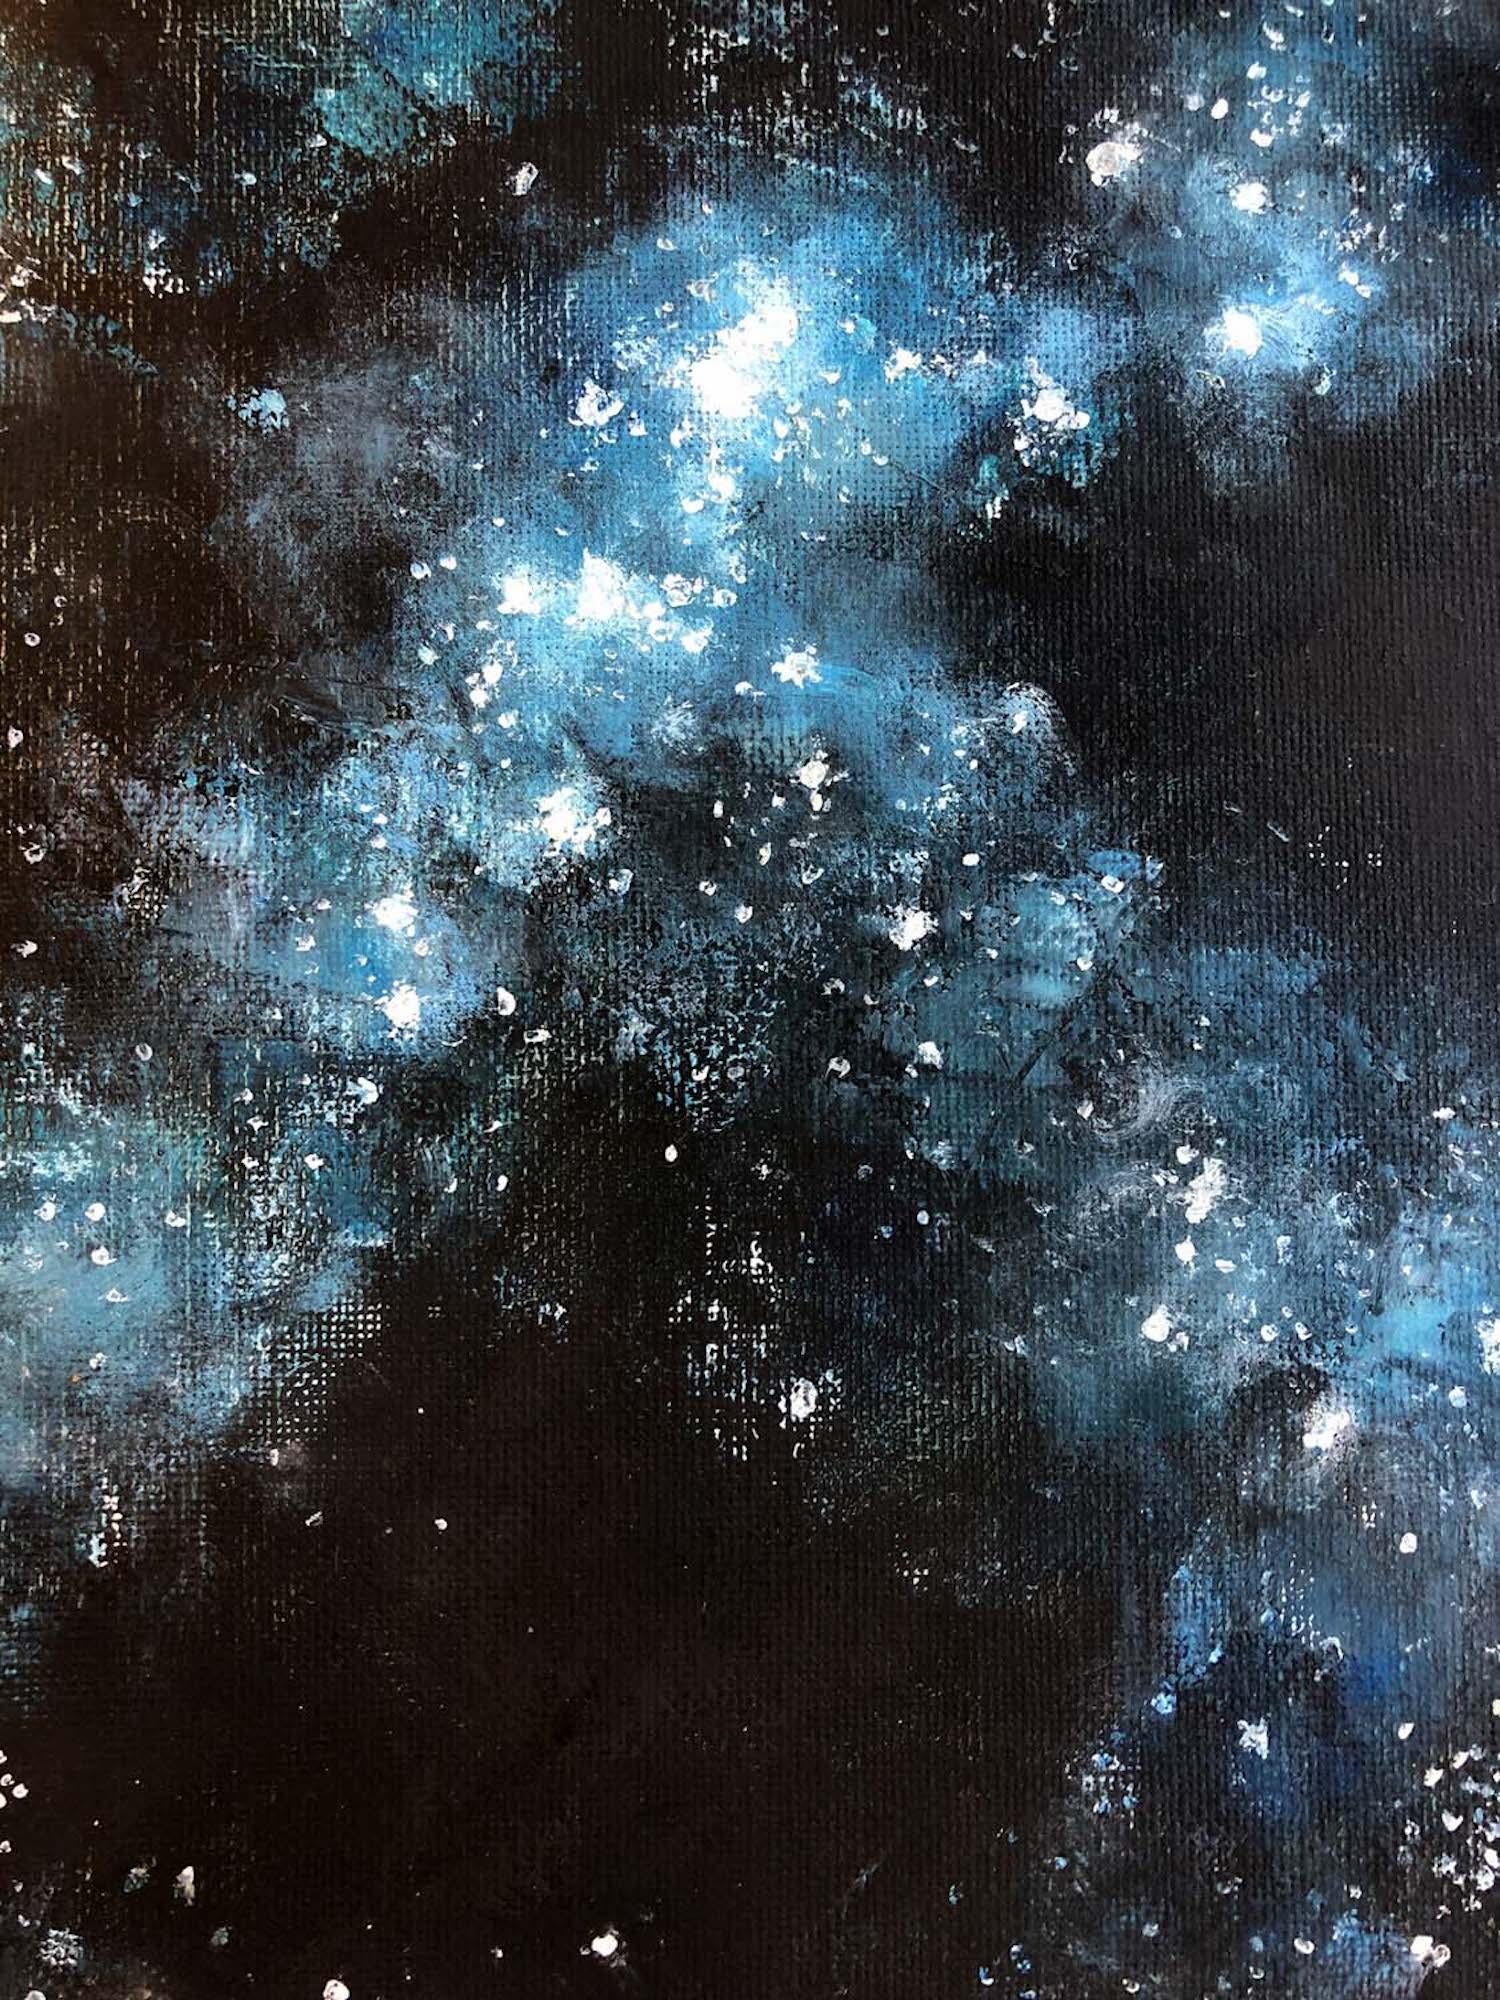 birth of the milky way painting